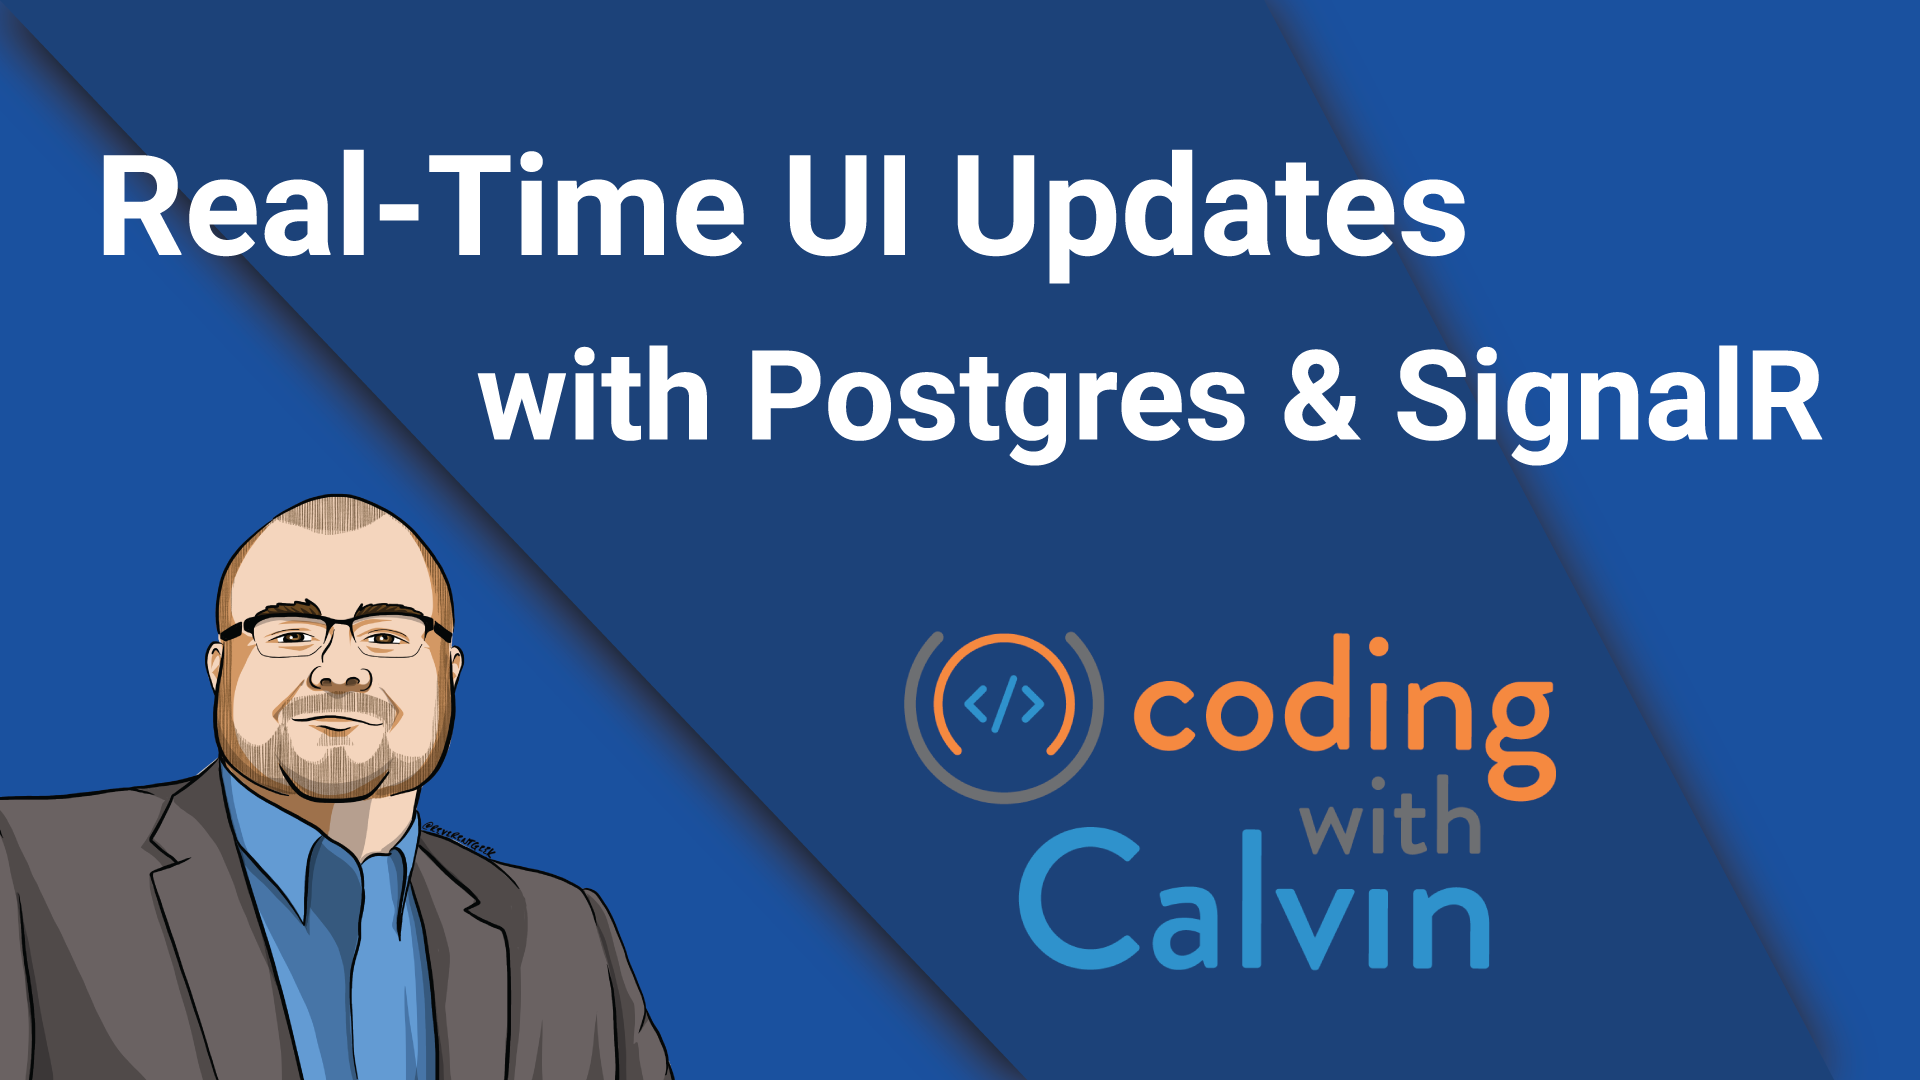 Real-Time UI Updates with Postgres and SignalR